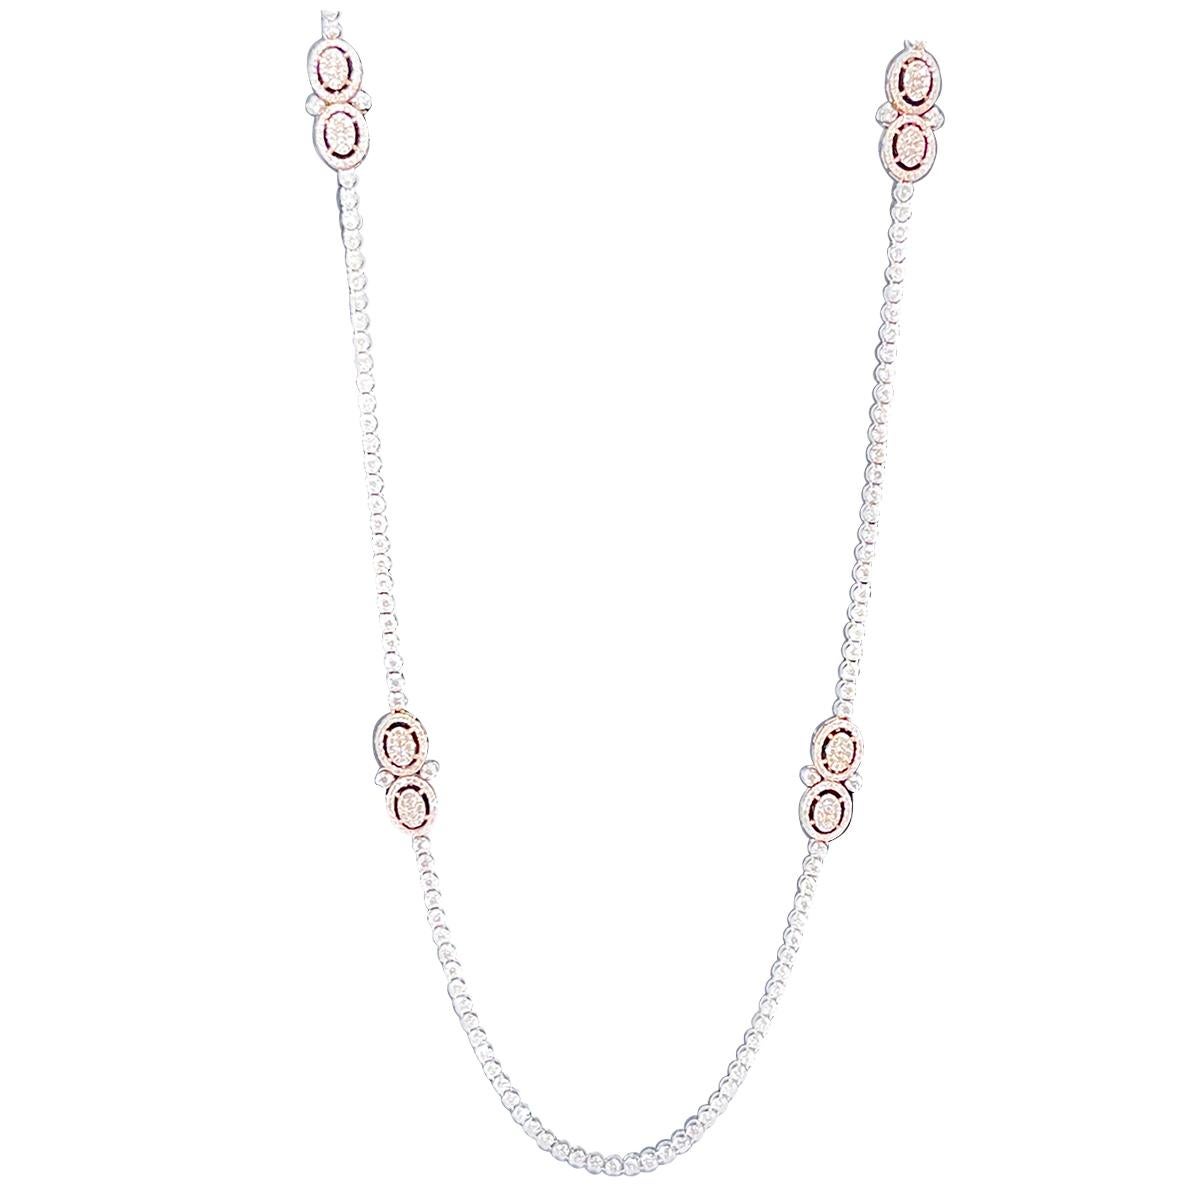 8 Ct Brilliant Cut Diamond Long Necklace in White & Pink 14 K Gold 27 Gm 2